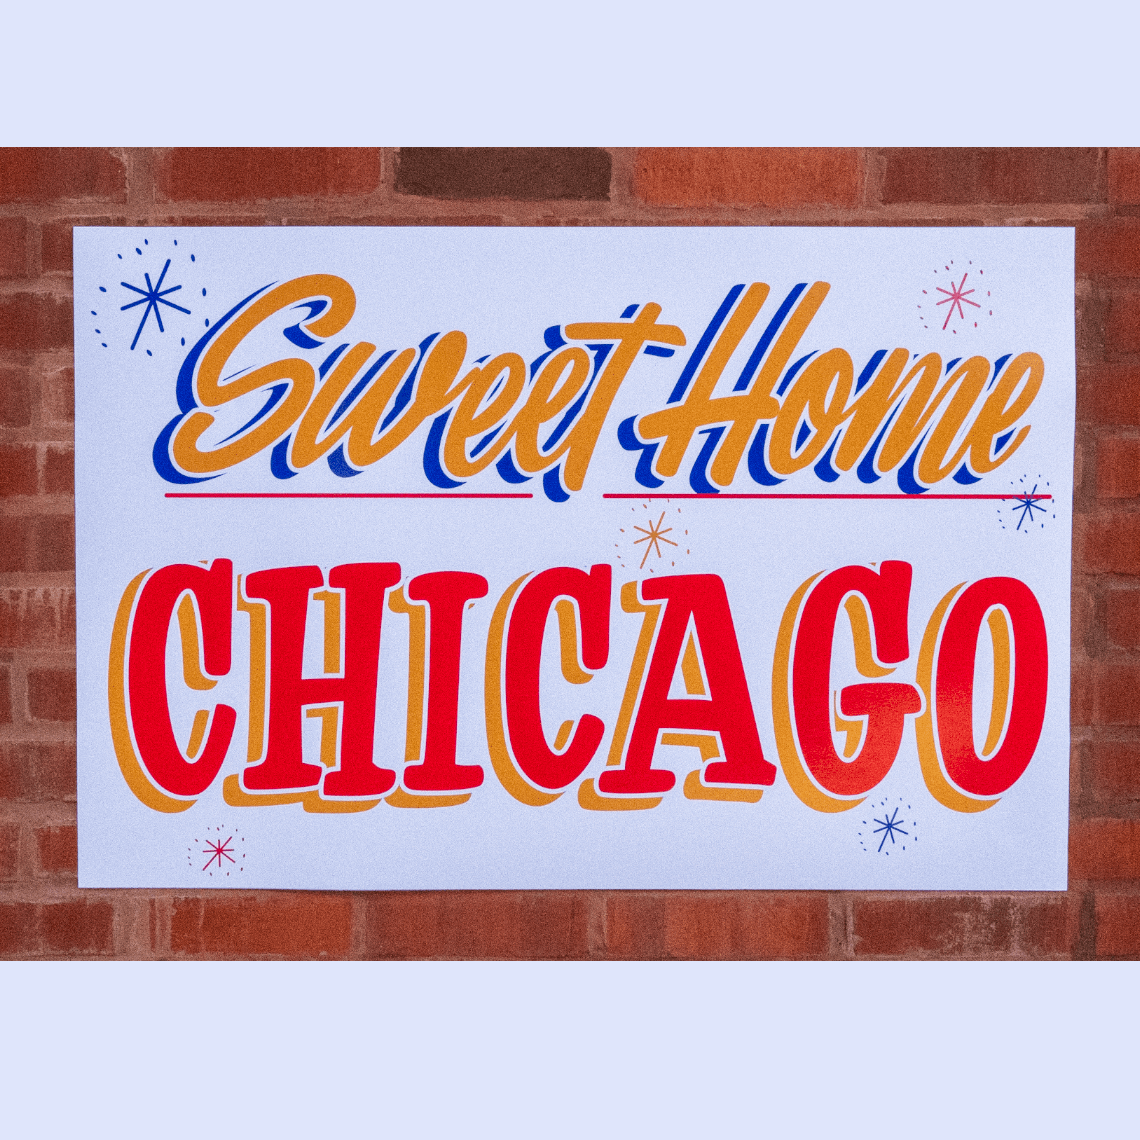 Sweet Home Chicago 18" x 24" Poster